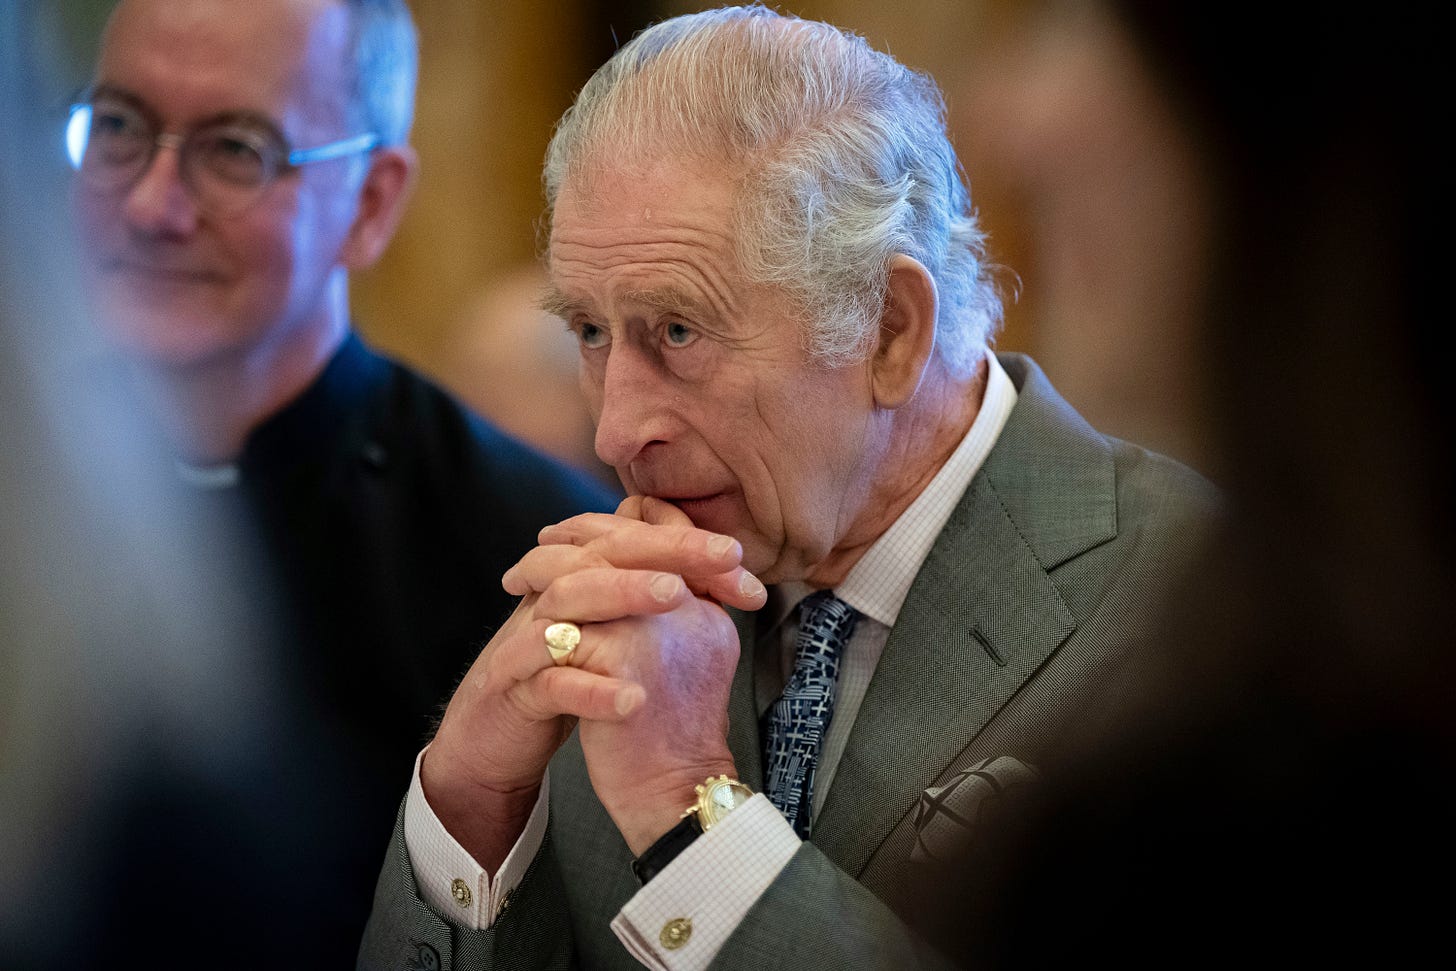 King Charles III sits with his chin resting on his folded hands.